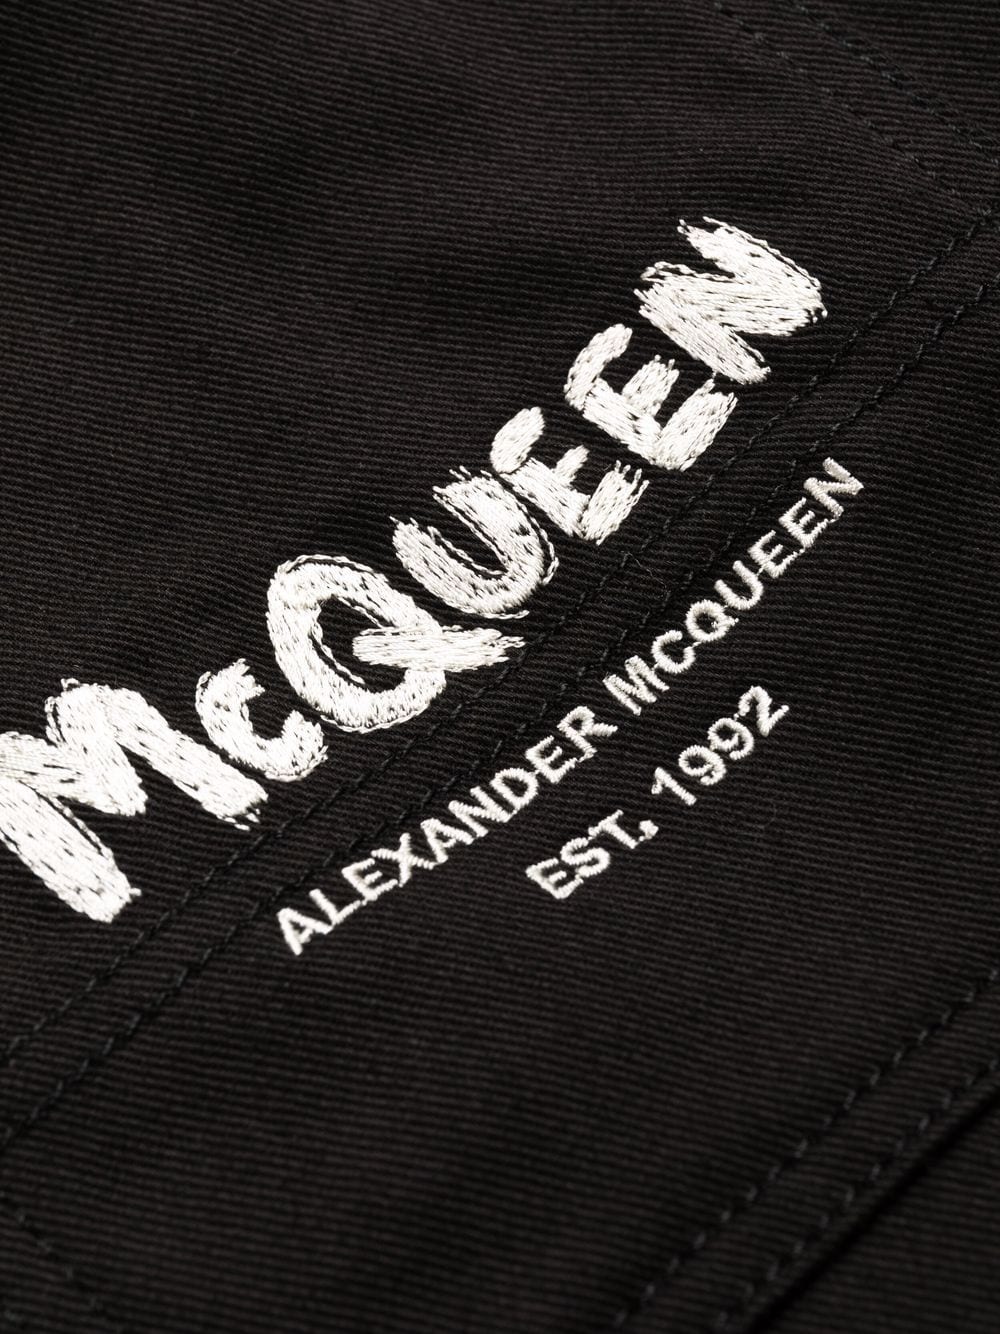 Alexander McQueenstraight jeans at Fashion Clinic